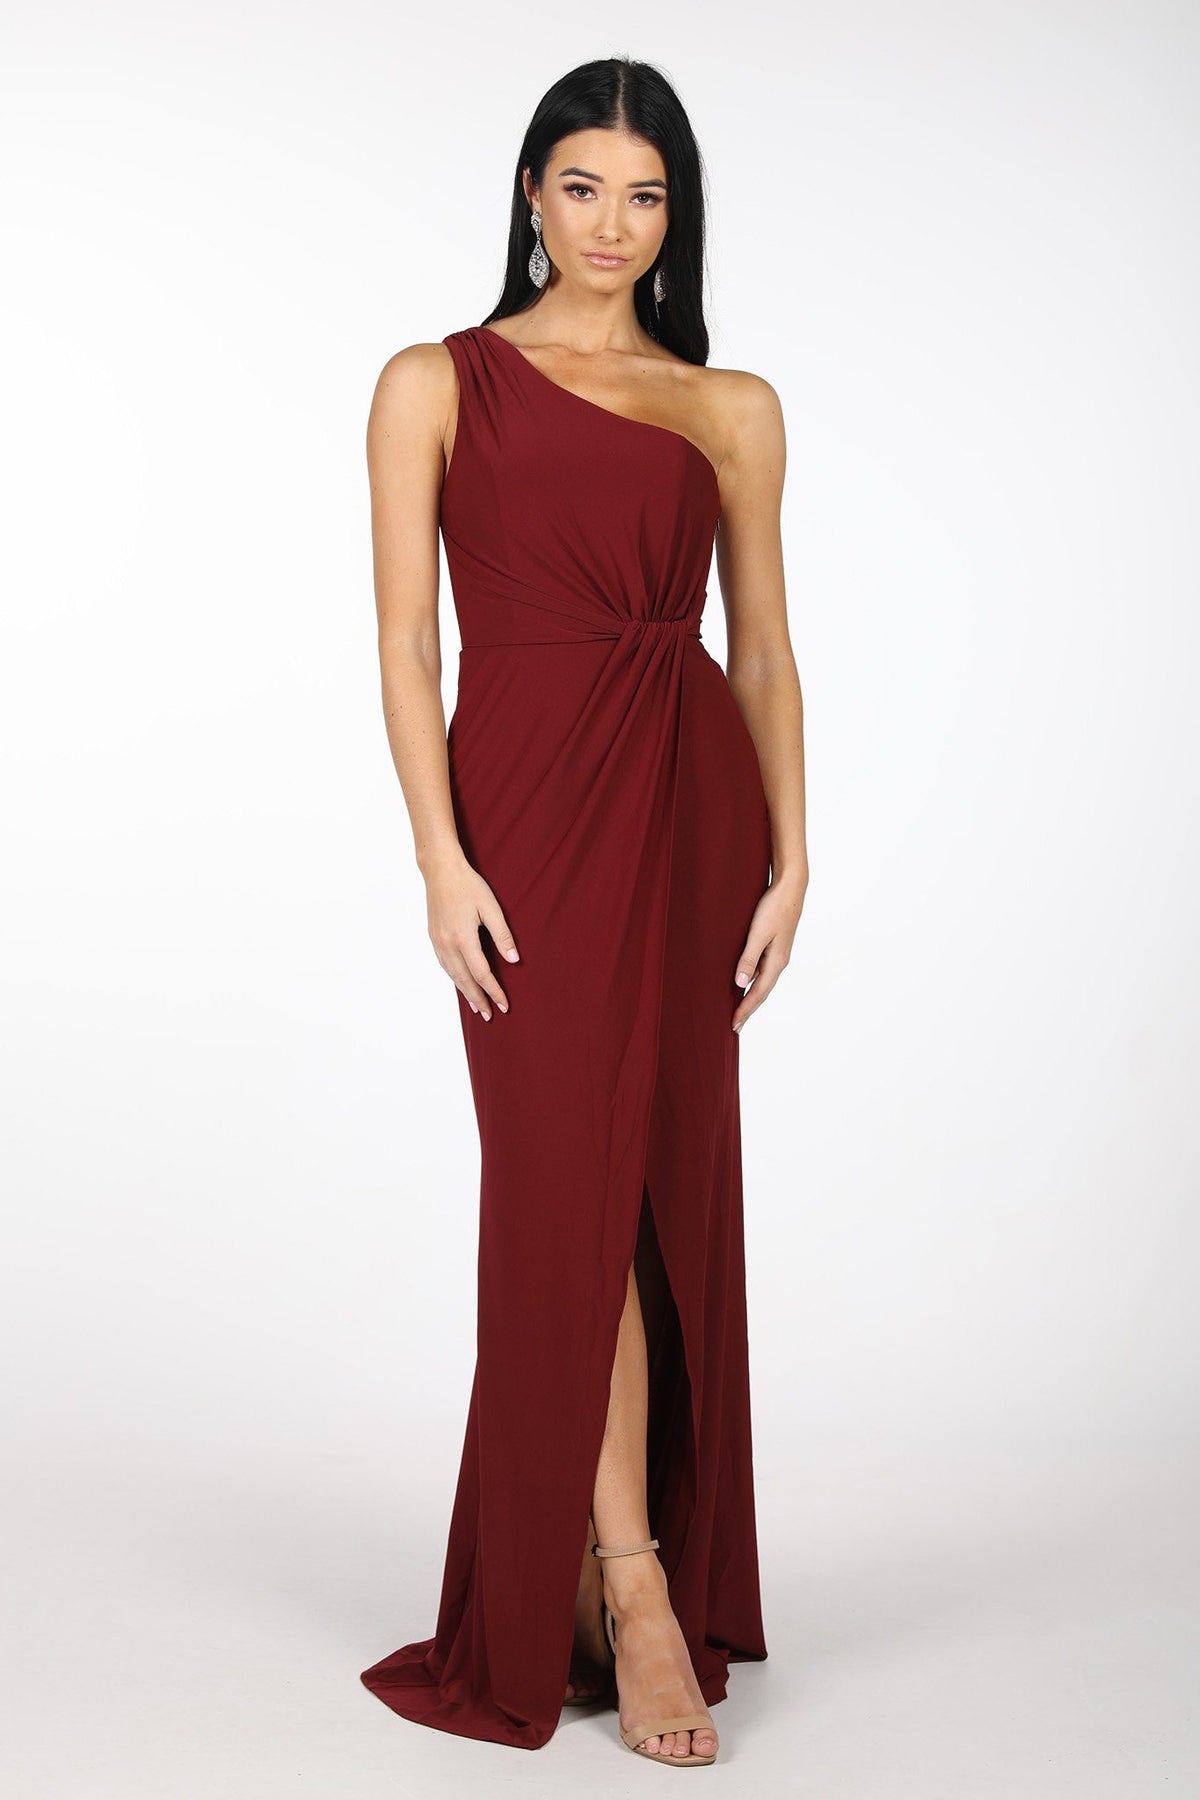 Deep Red Burgundy One Shoulder Formal Dress with Asymmetrical One Shoulder Neckline, Ruched Waist, Above Knee Slit, and a Column Styled Silhouette